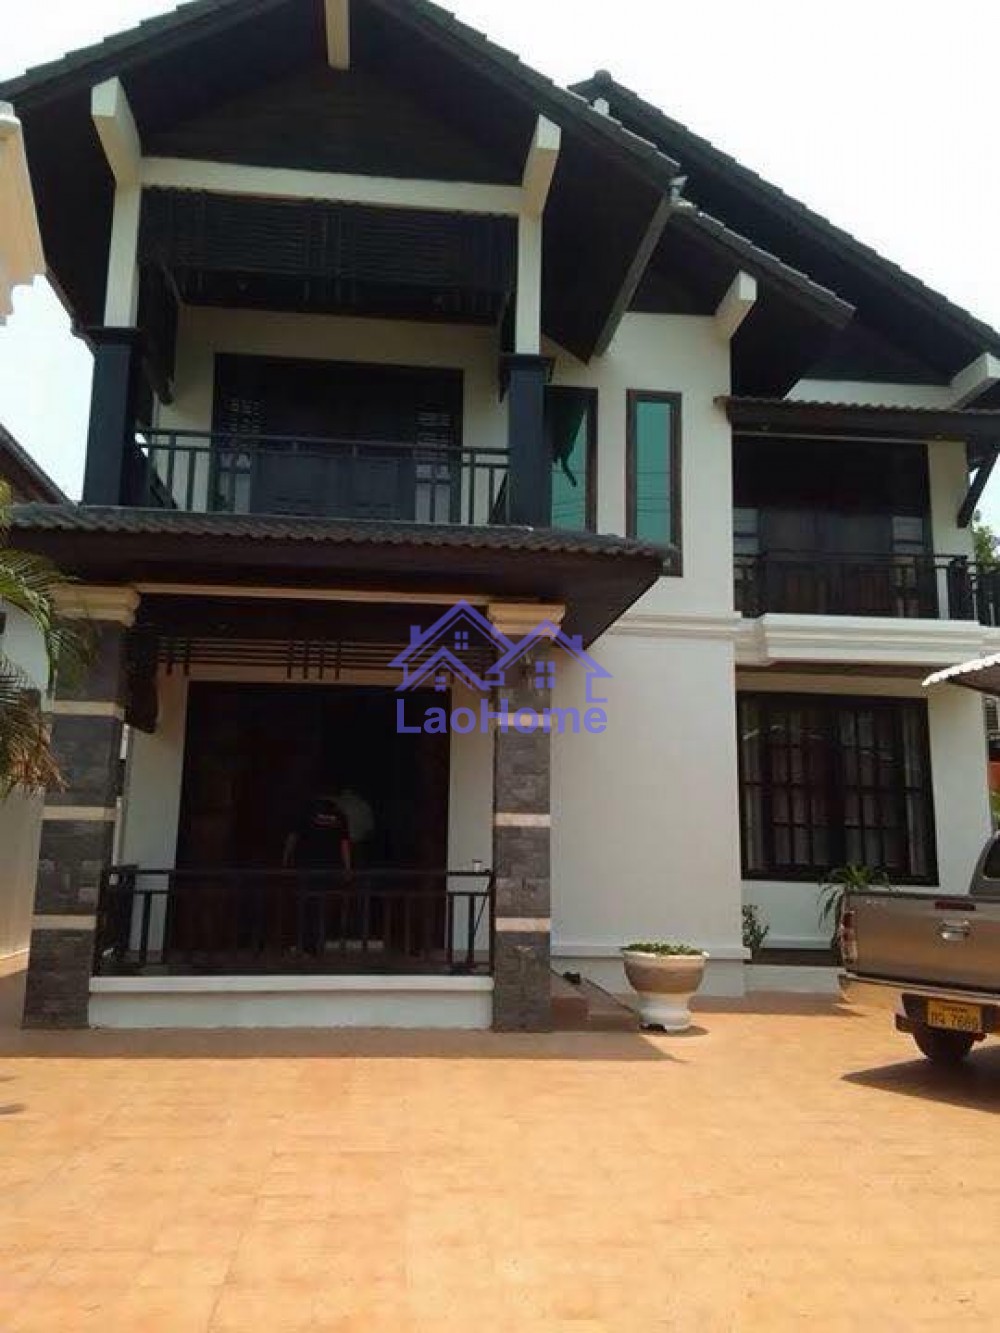 For Rent Laohome Real Estate Laos